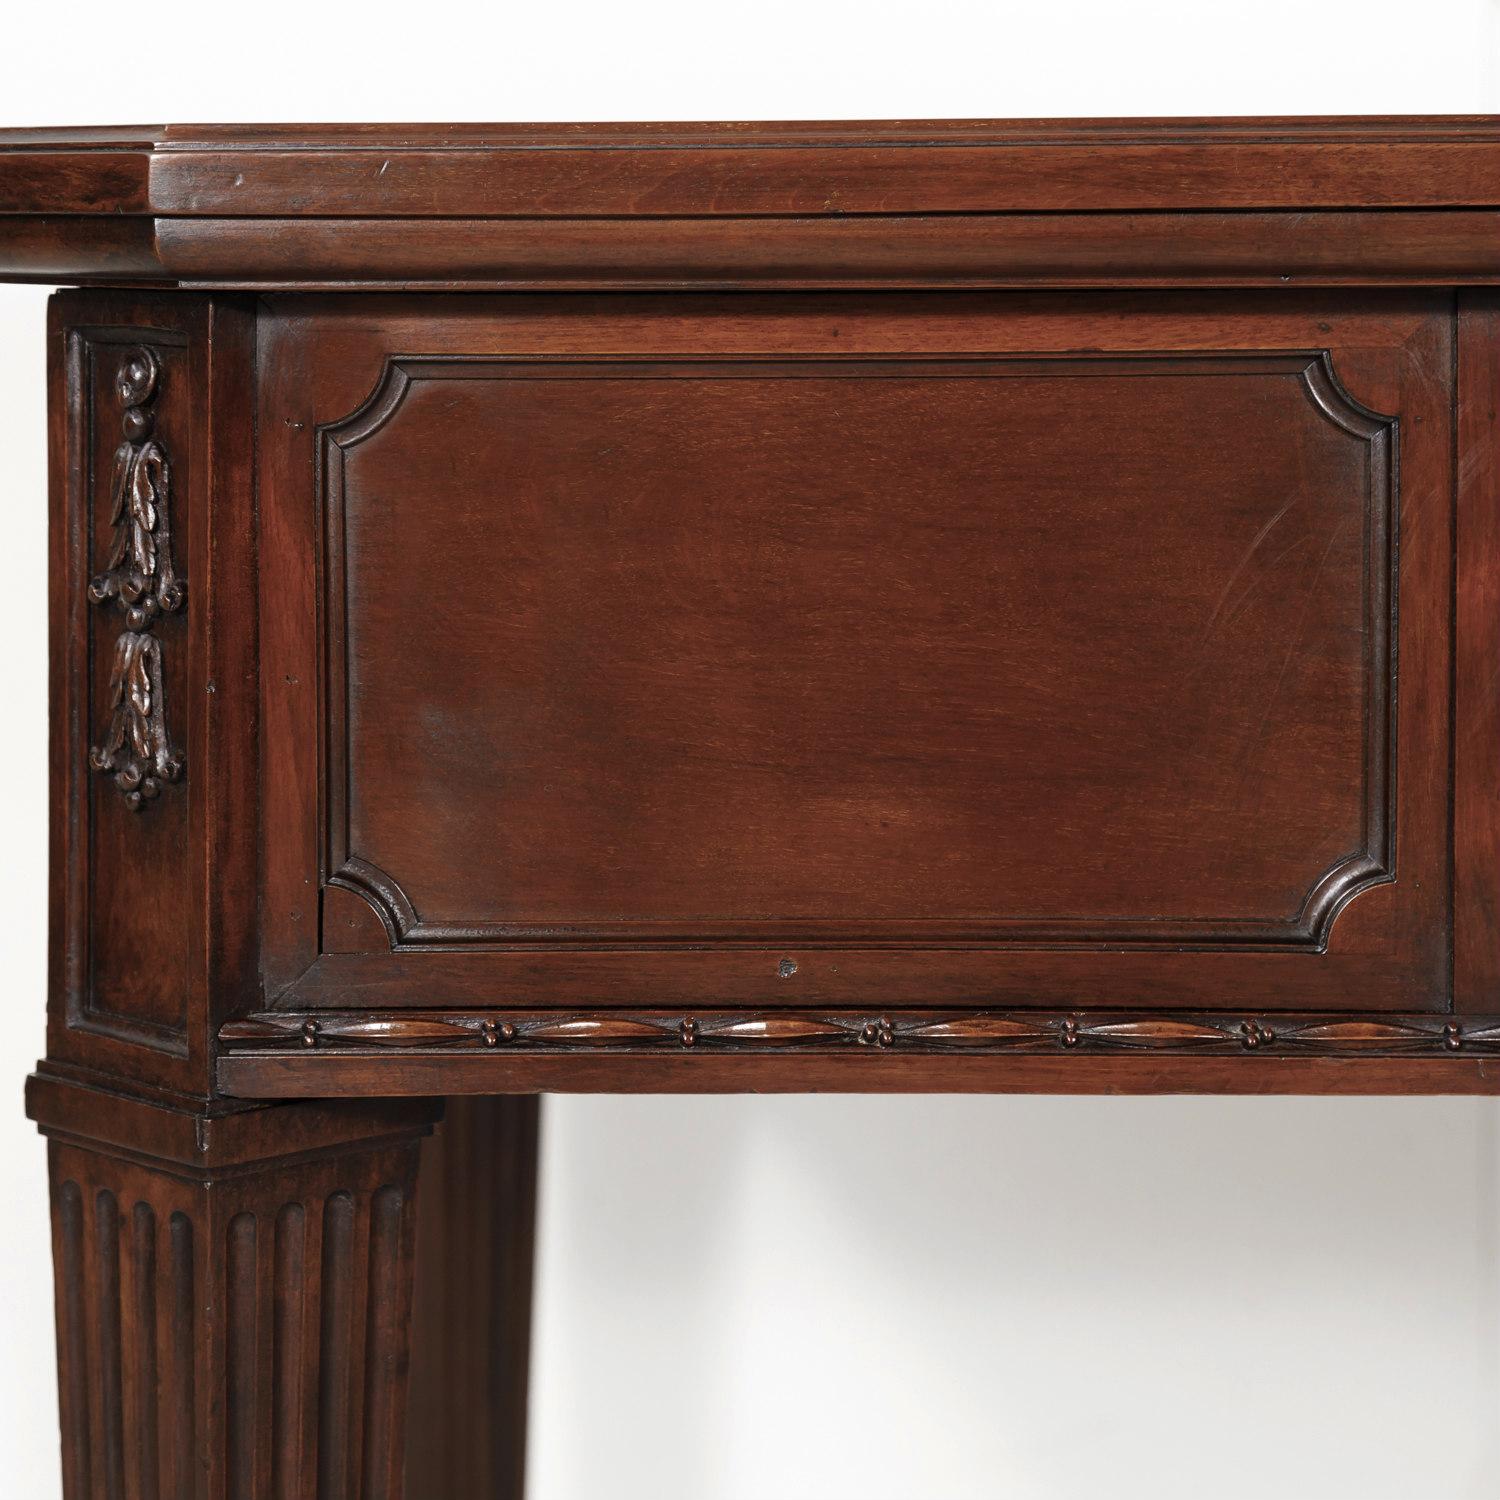 19th Century French Louis XVI Style Walnut Bureau Plat or Desk with Leather Top 13